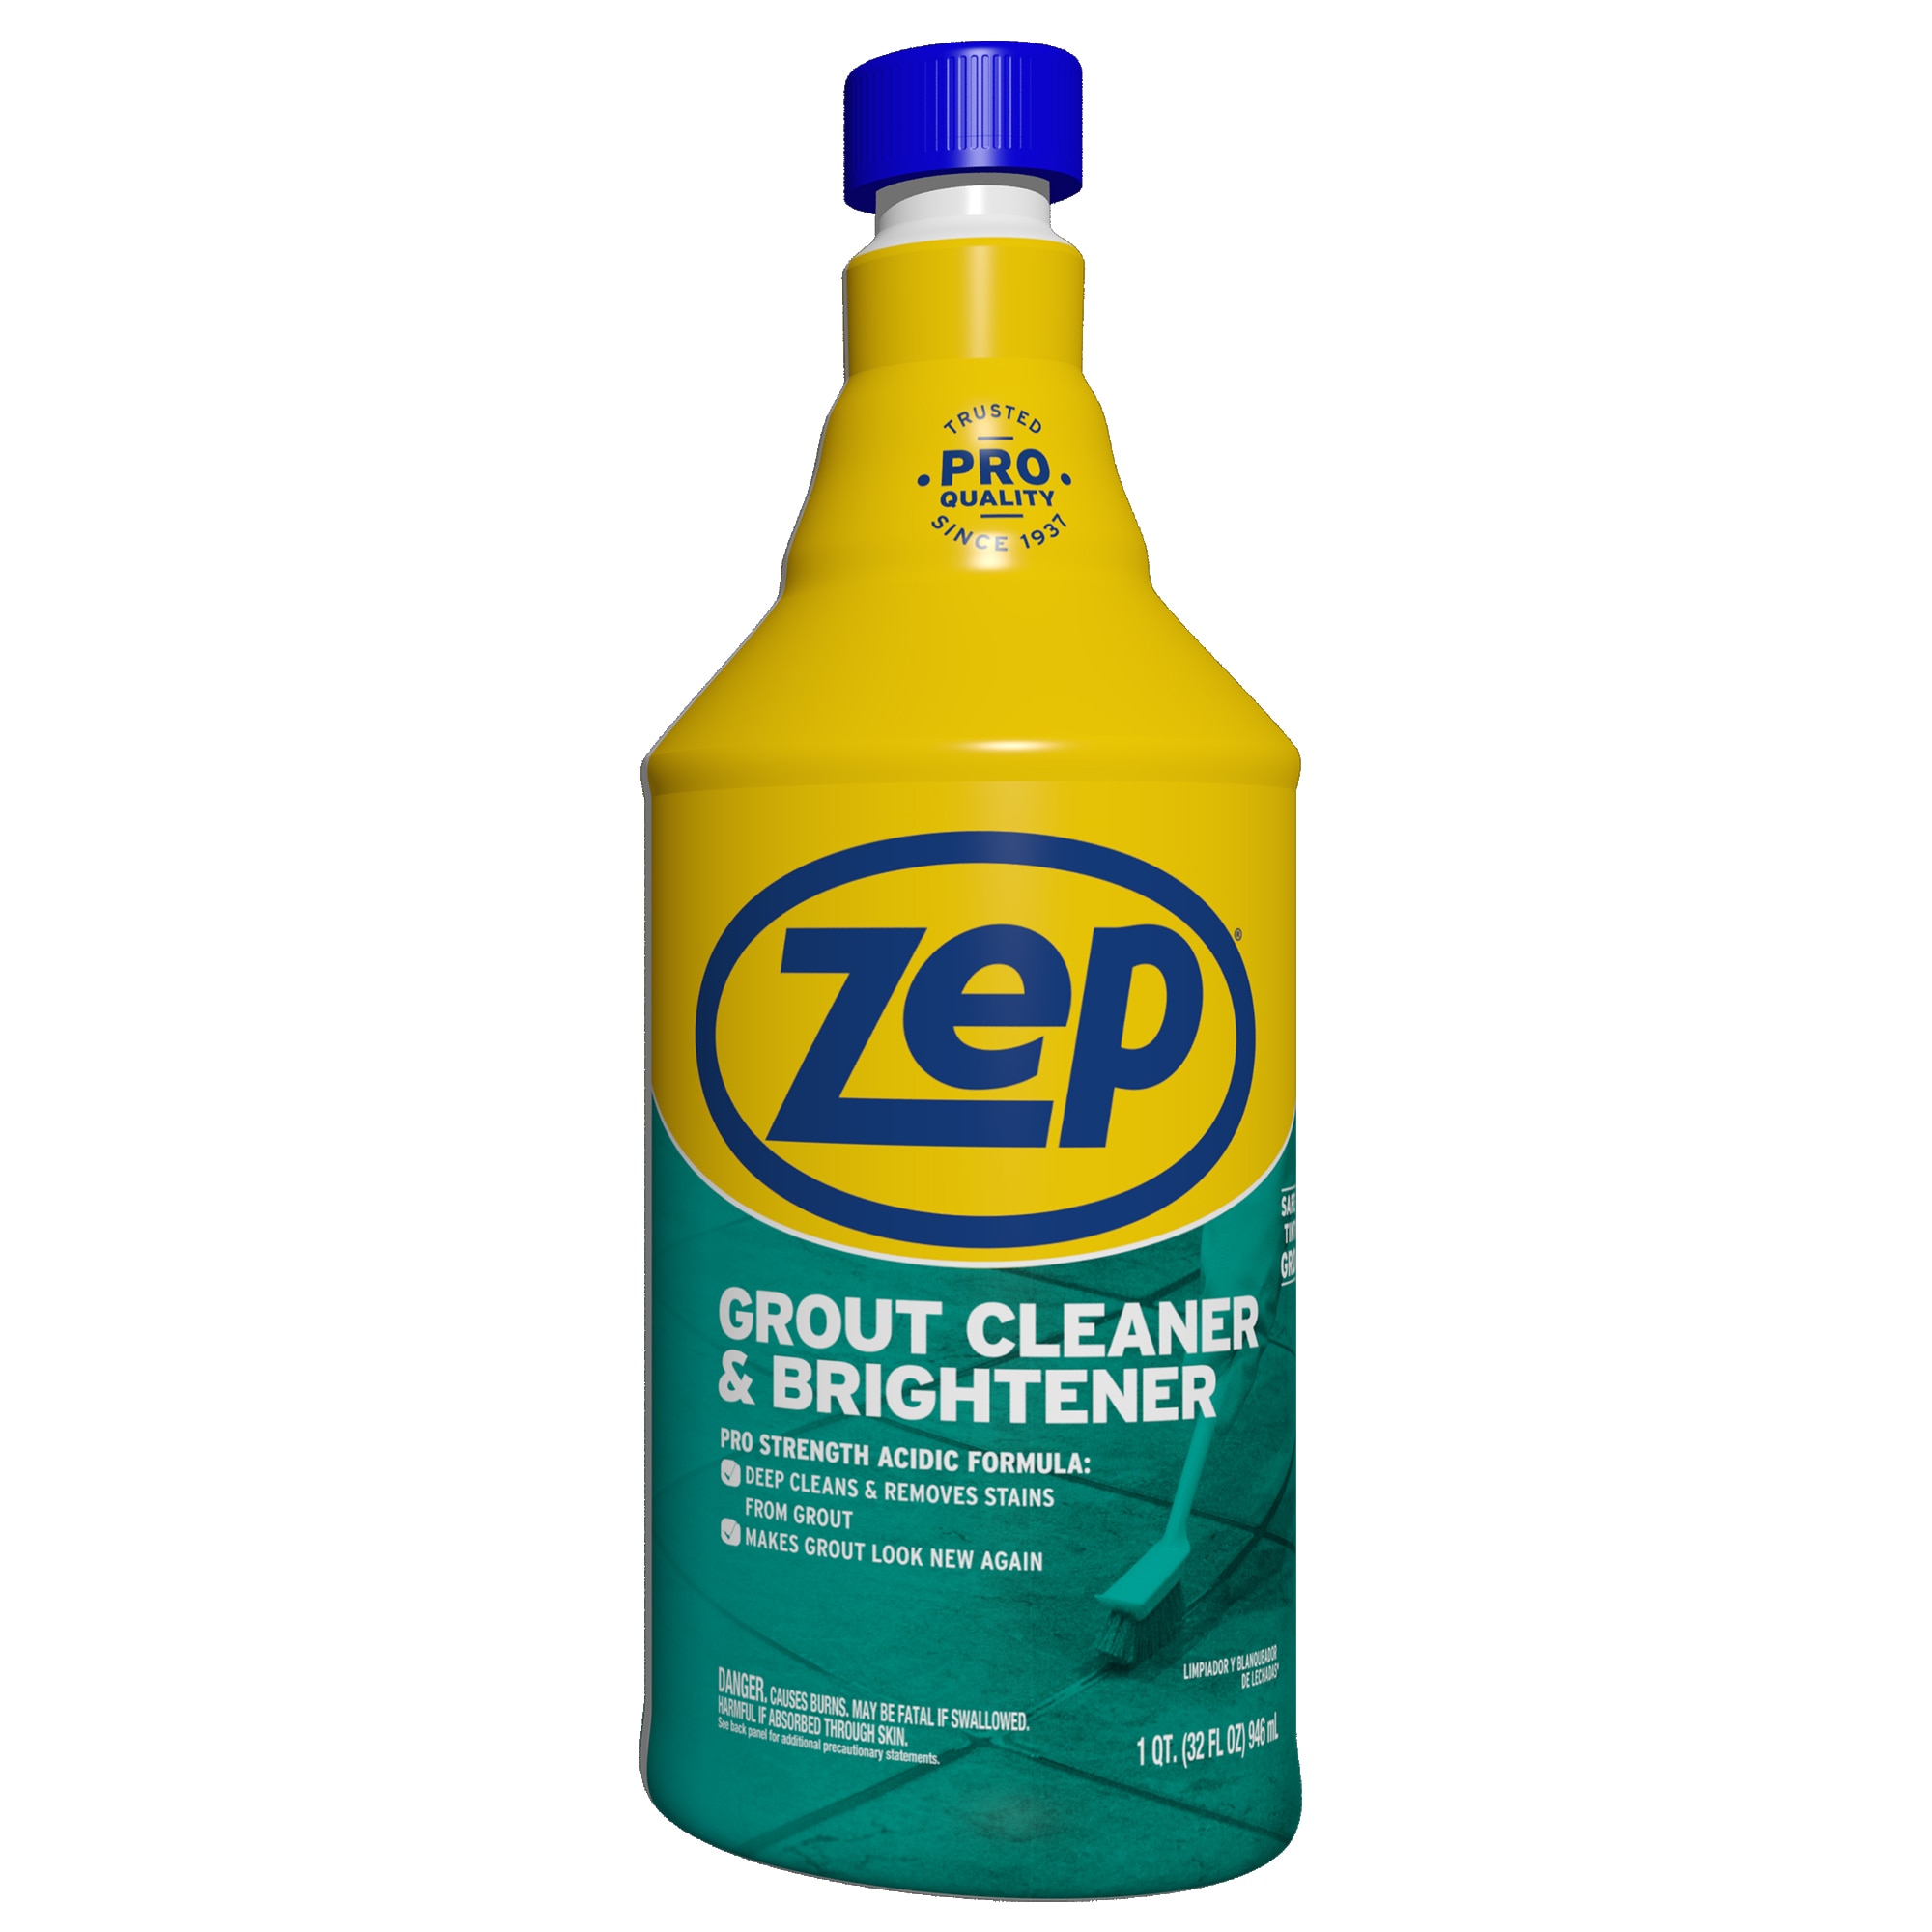 ZEP Heavy Duty Tile and Grout Cleaner: Bottle, 1 qt Container Size, Ready  to Use, Liquid, 12 PK